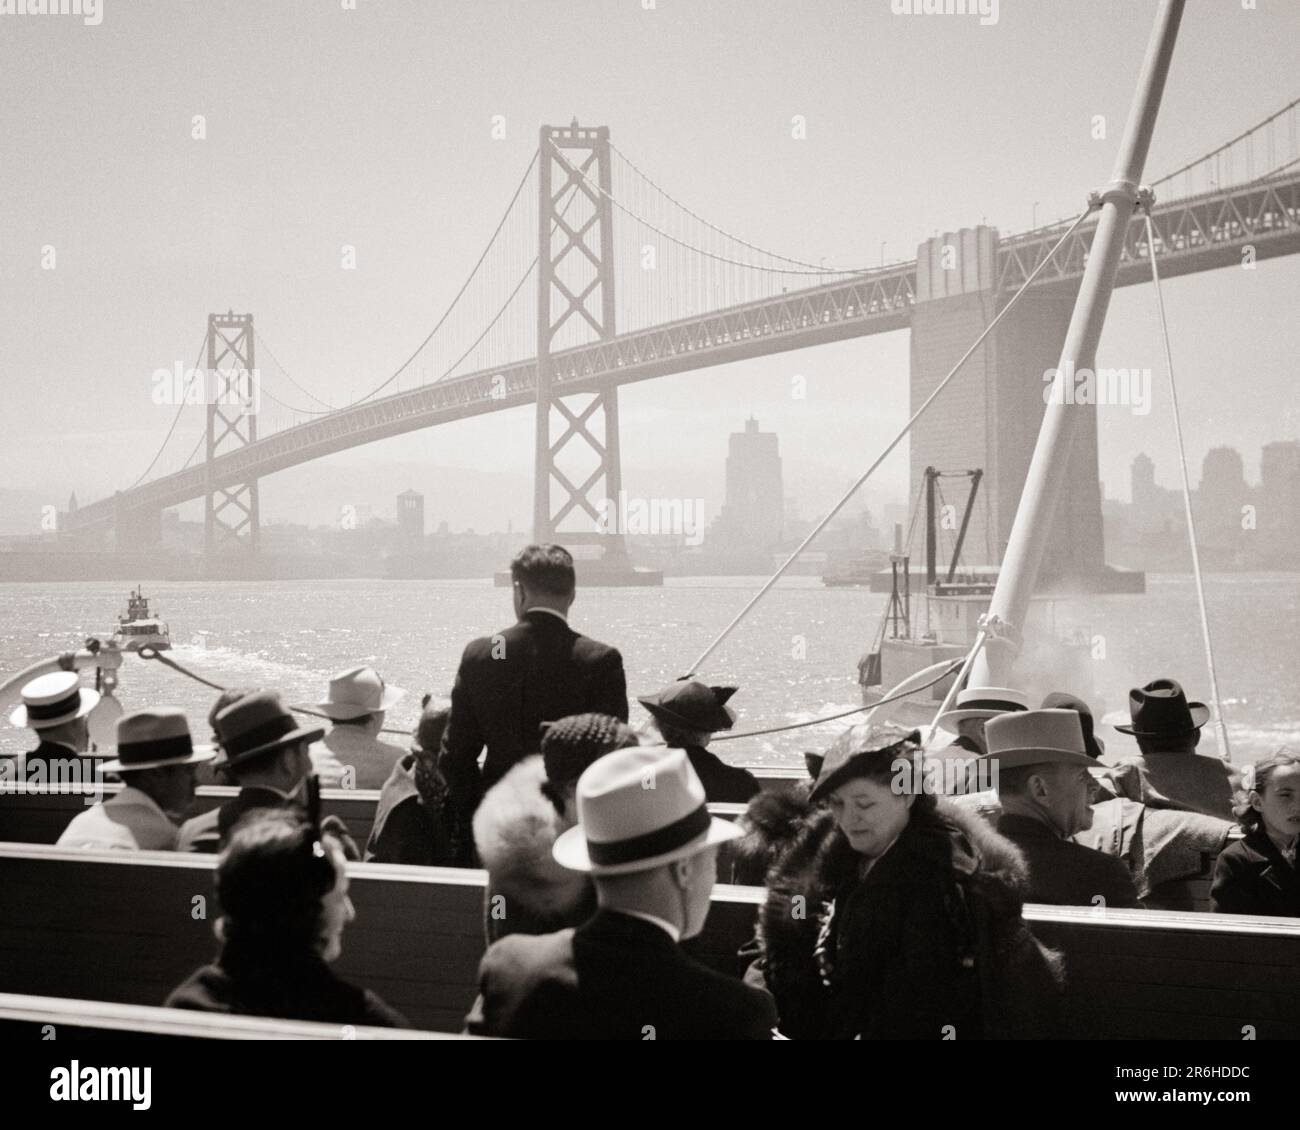 1930s VIEW FROM A FERRY FROM SAN FRANCISCO TO OAKLAND OF THE OAKLAND BAY BRIDGE CALIFORNIA USA - q37264 CPC001 HARS SCENIC MALES TRANSPORTATION B&W FRANCISCO SMOG HEAD AND SHOULDERS ADVENTURE COMMUTERS CA TOURISTS WEST COAST CITIES FERRY OAKLAND STYLISH FERRIES OAKLAND BAY BRIDGE SAN FRANCISCO TRANSIT BLACK AND WHITE CAUCASIAN ETHNICITY OLD FASHIONED SUSPENSION BRIDGE Stock Photo